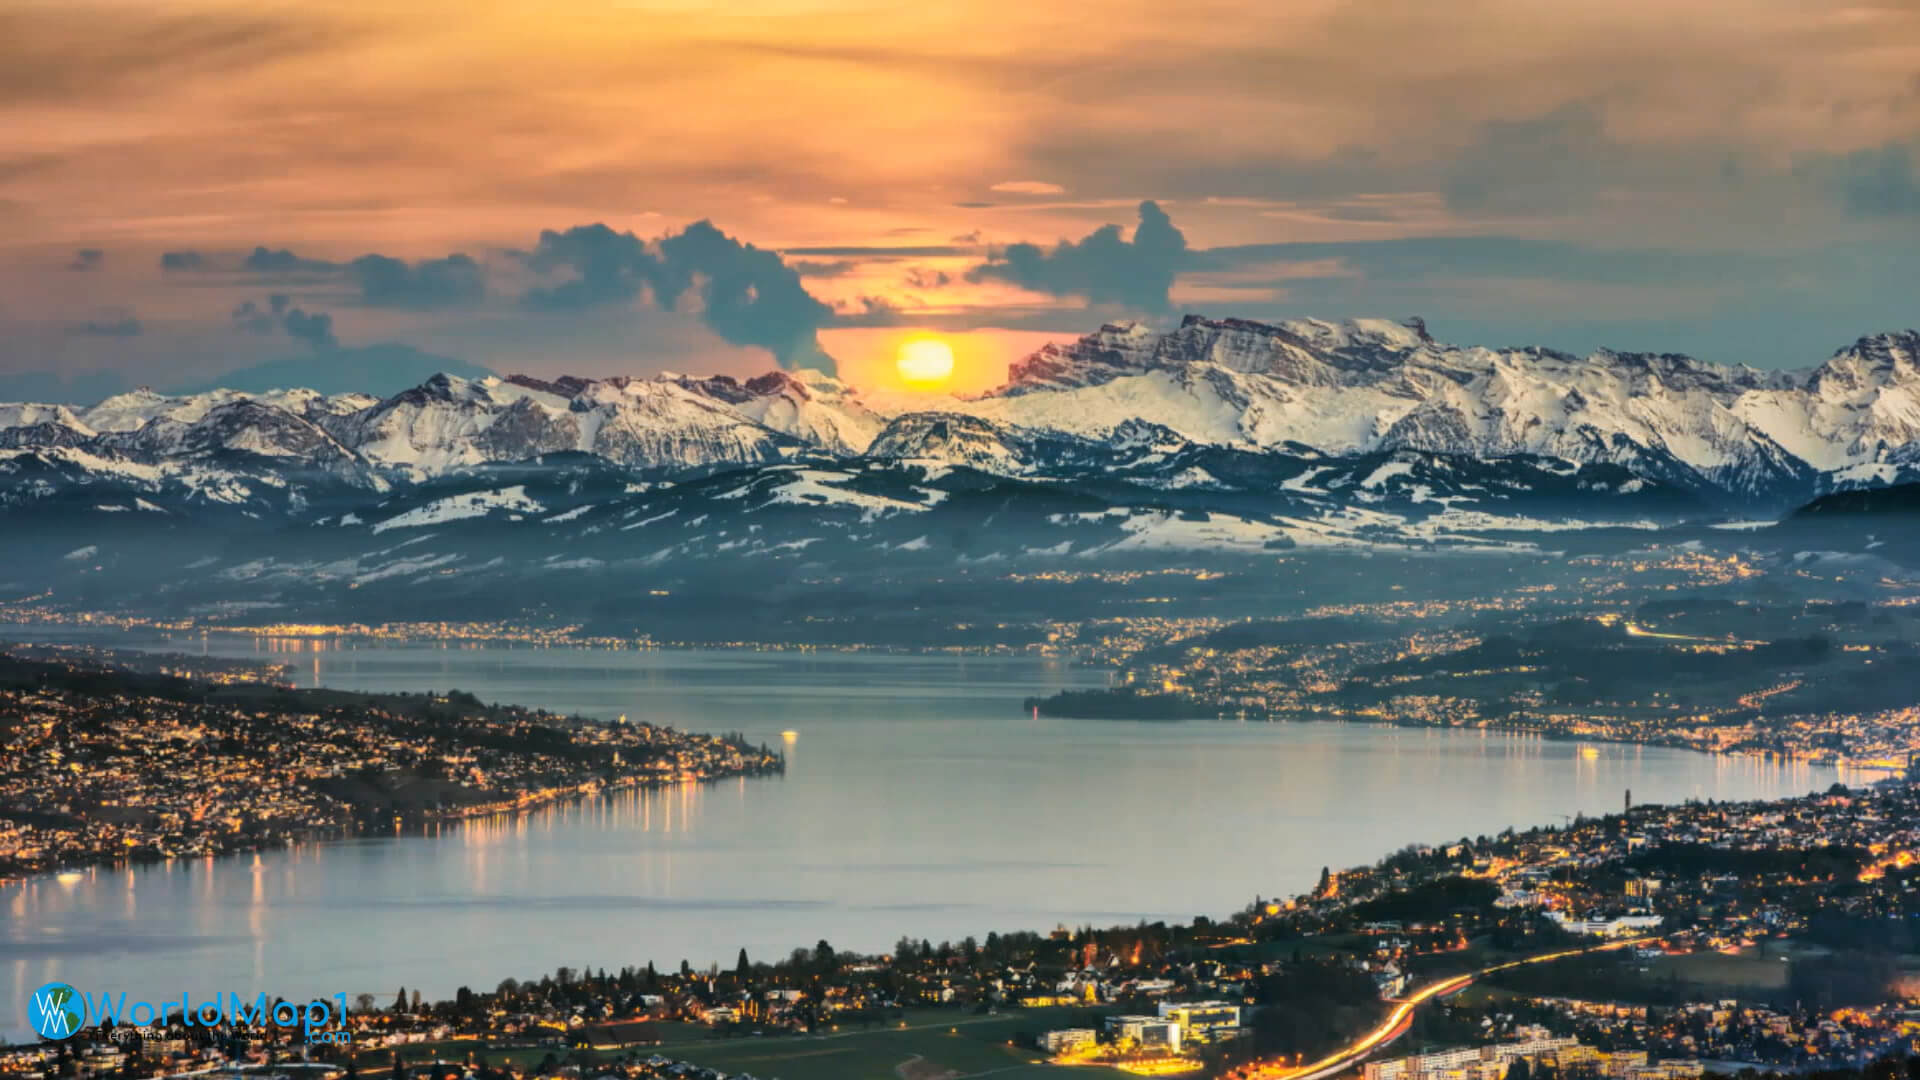 Zurich and Alps at Sunset